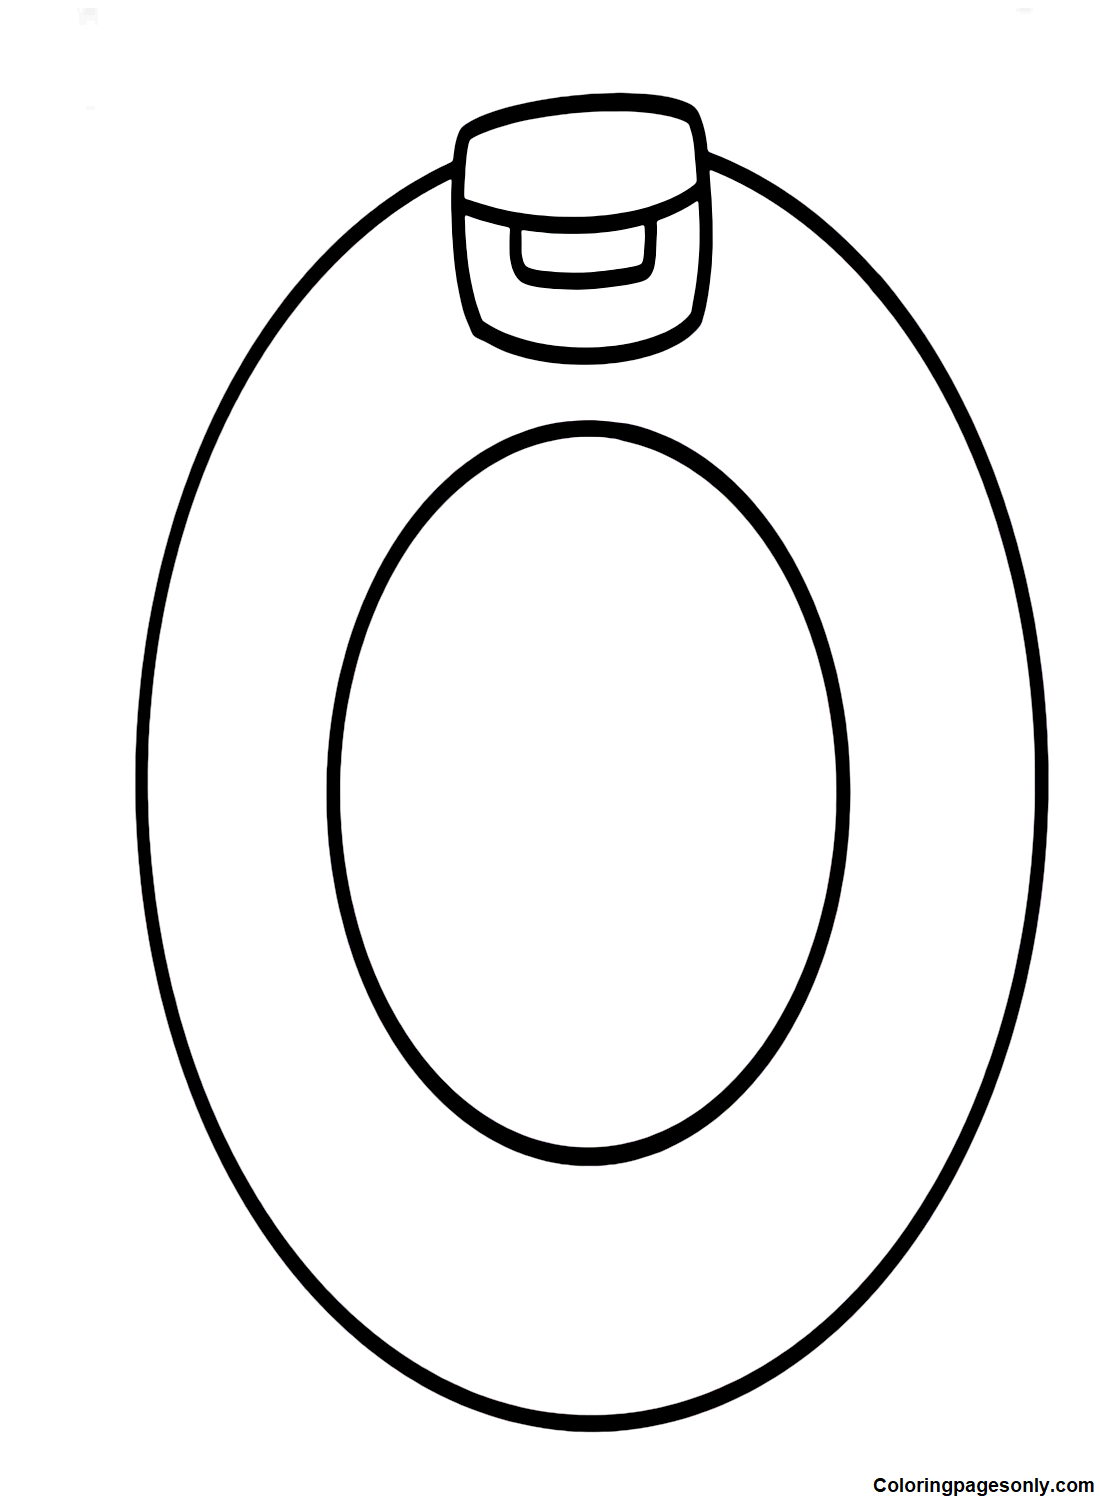 Lettle O from Alphabet Lore Coloring Page